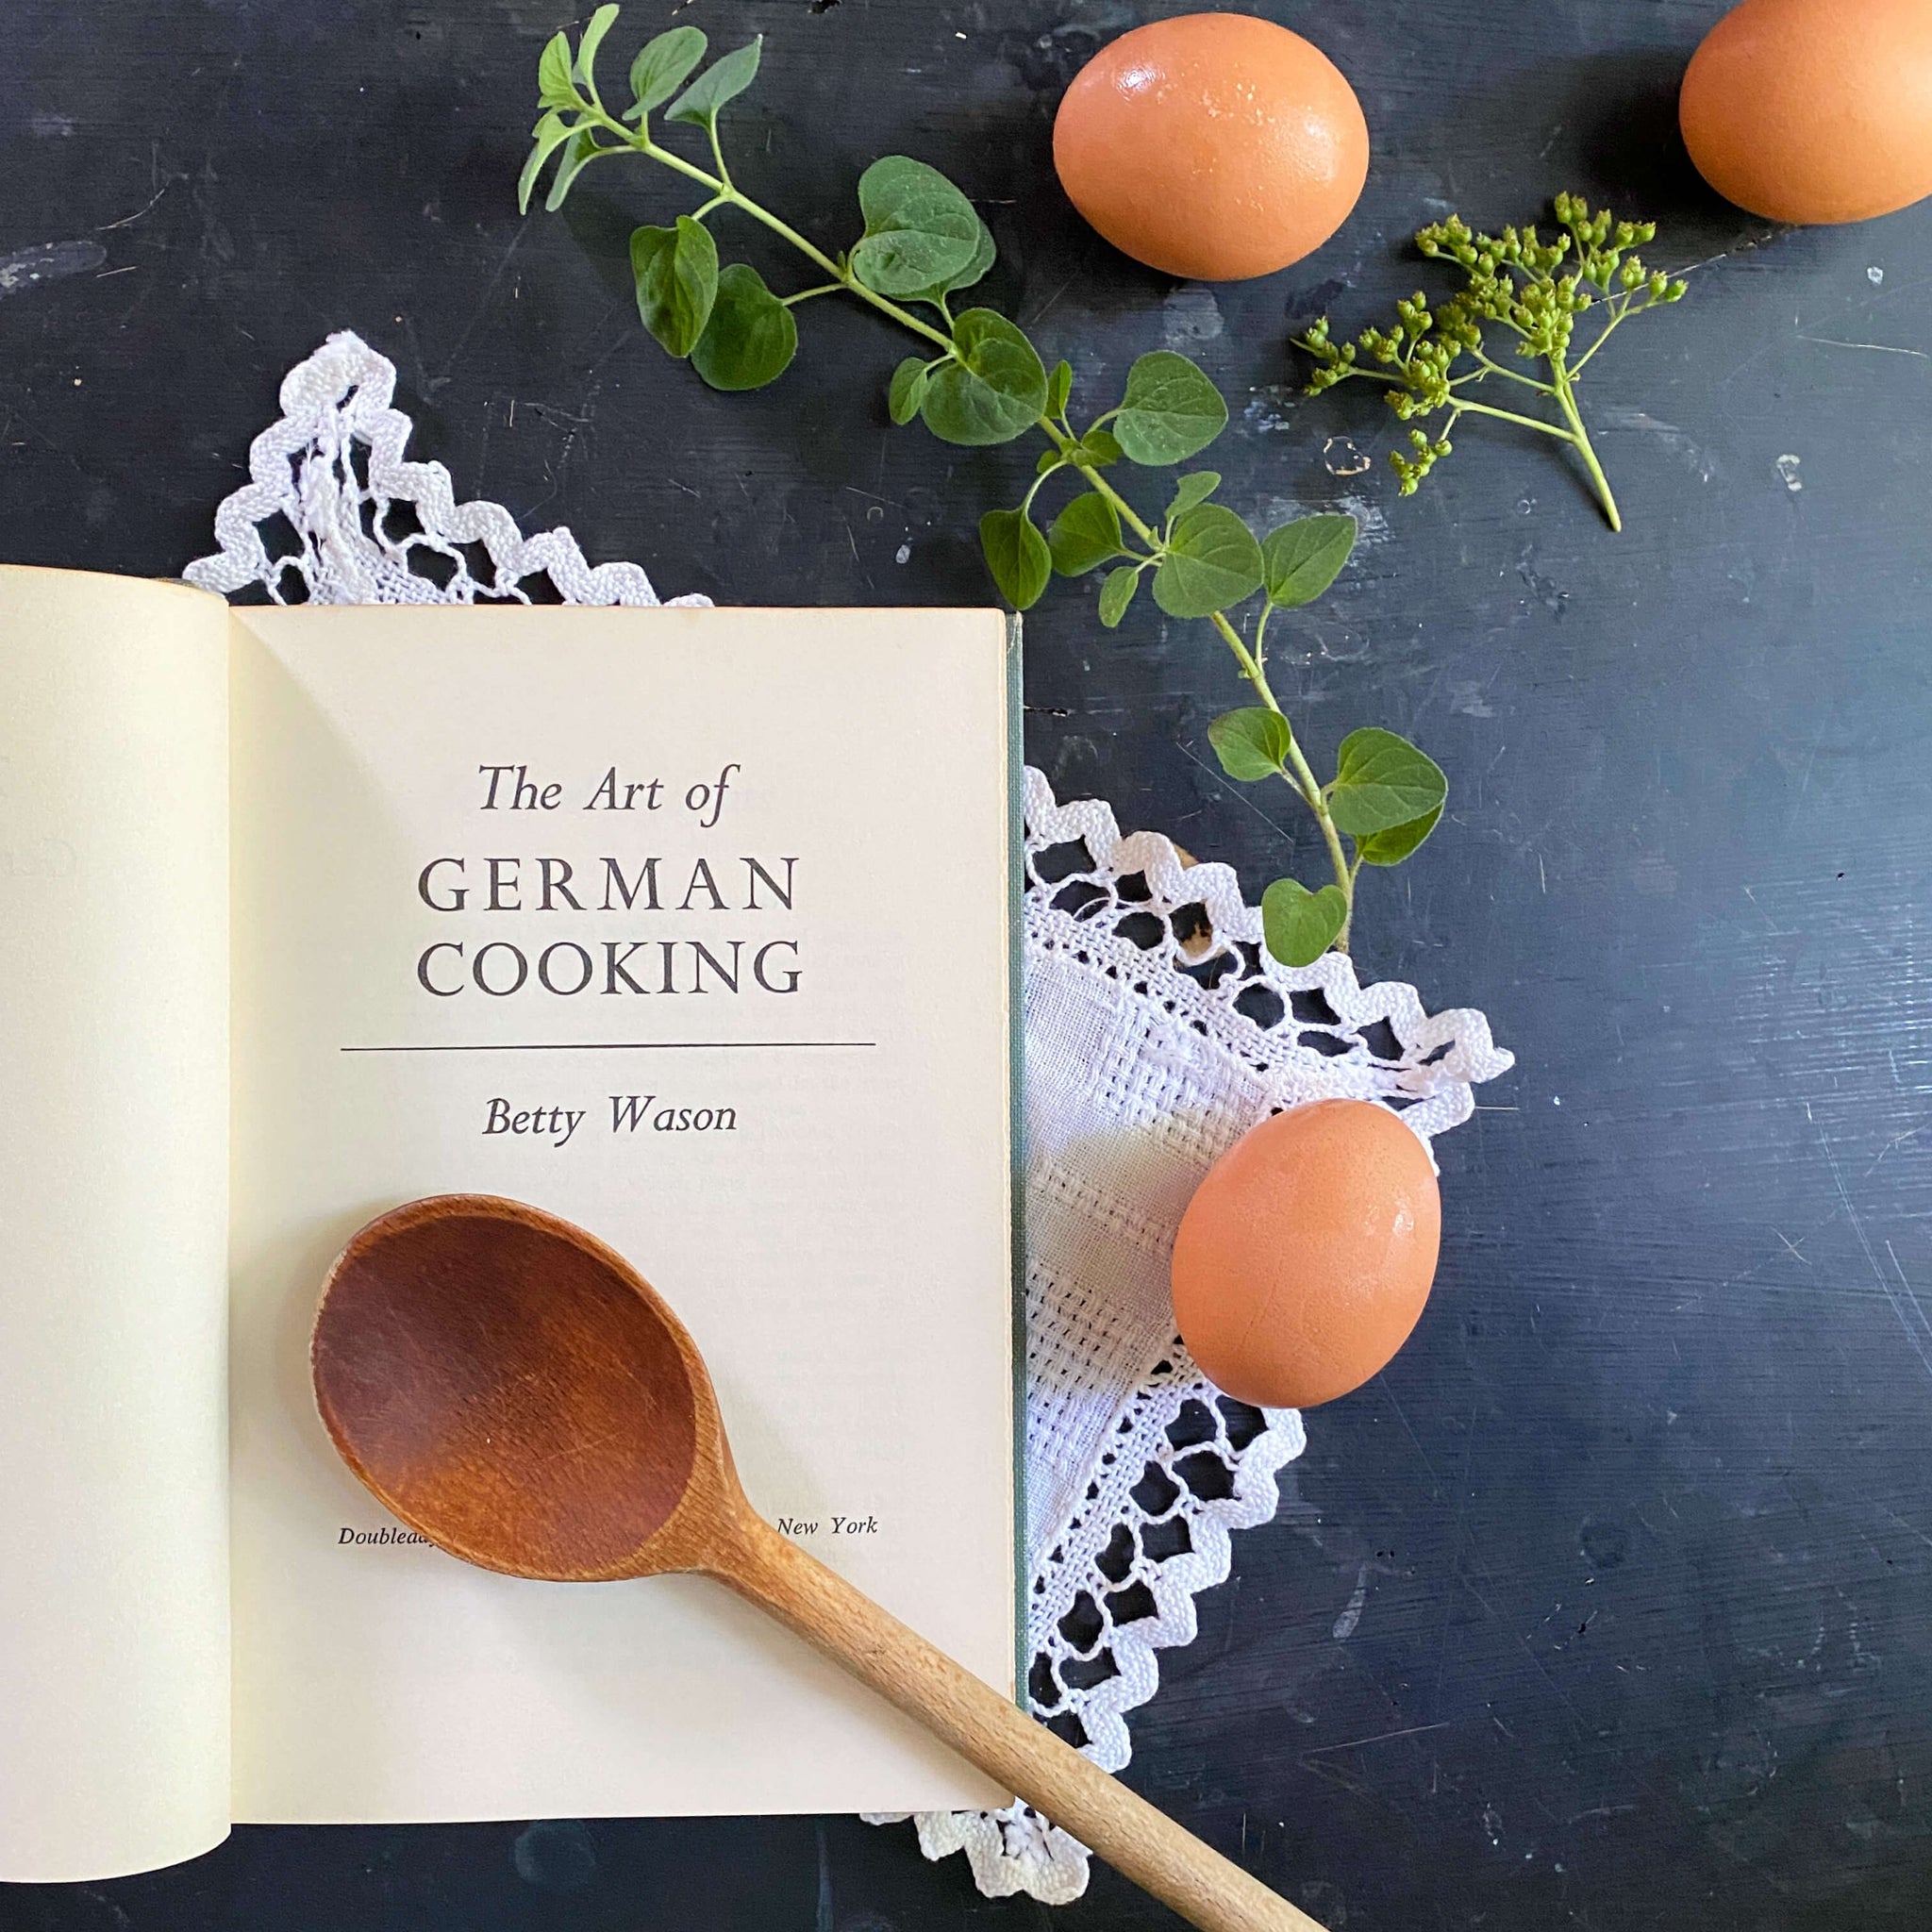 The Art of German Cooking - Betty Wason - 1967 Edition